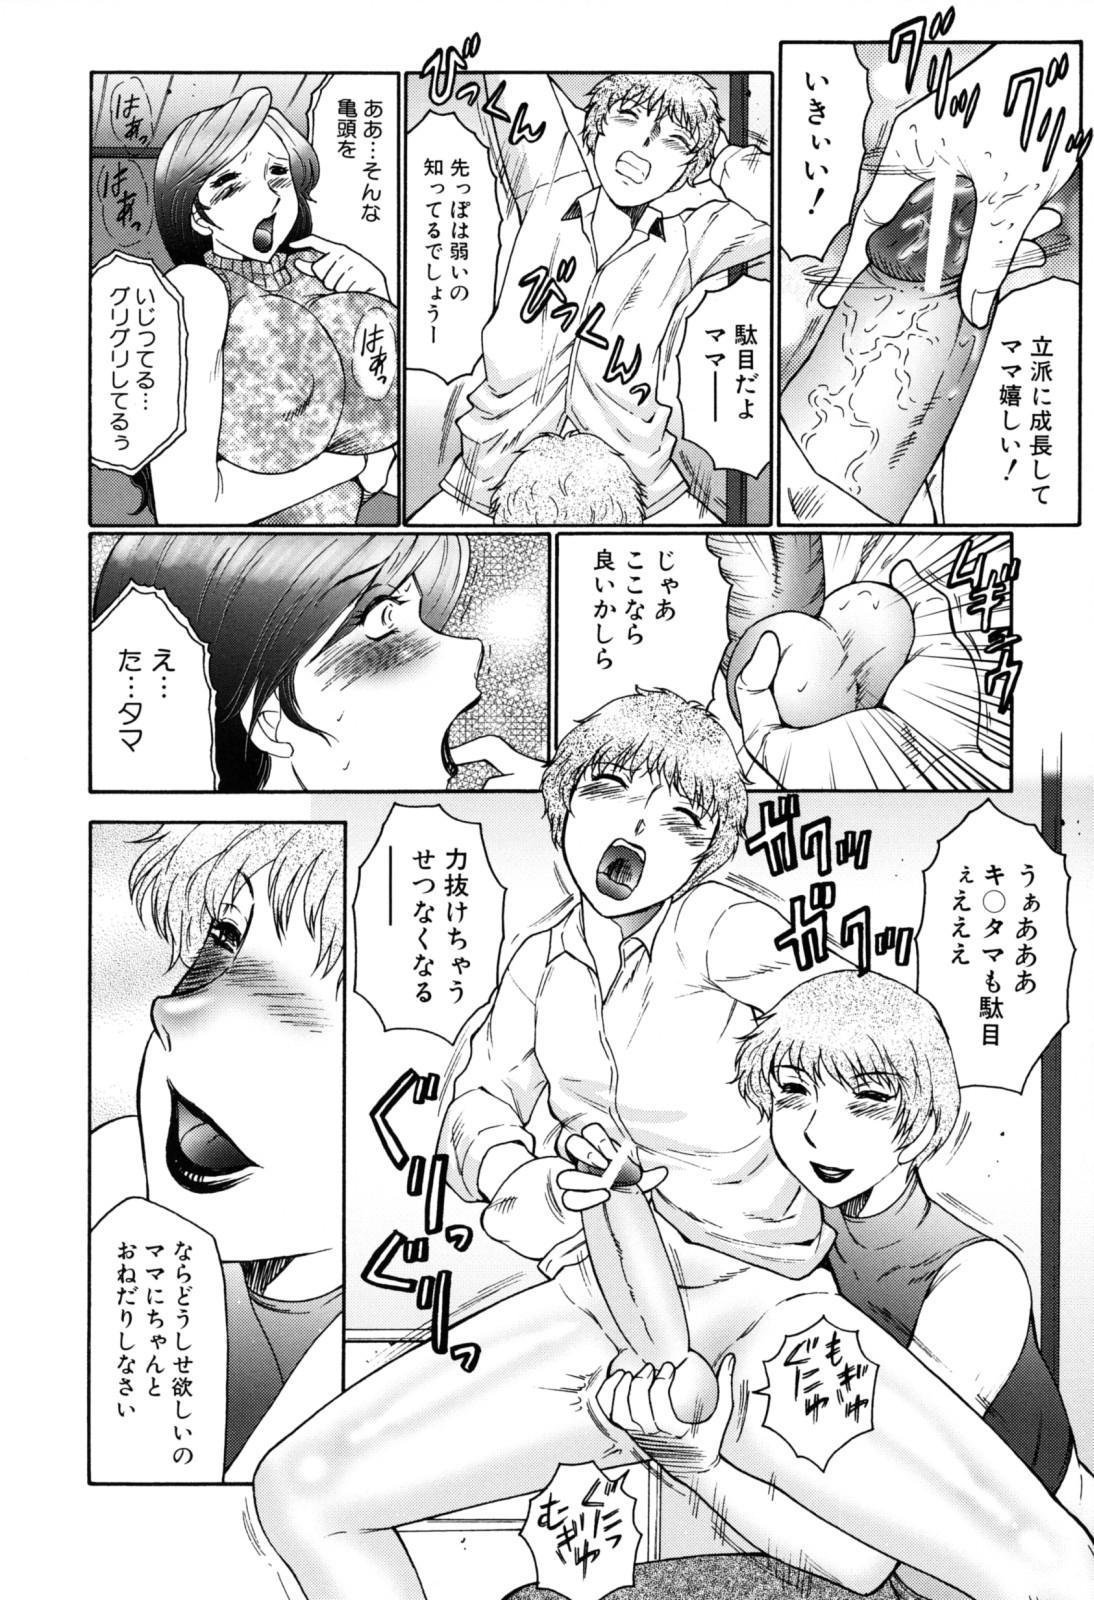 Boshino Toriko - The Captive of Mother and the Son 11